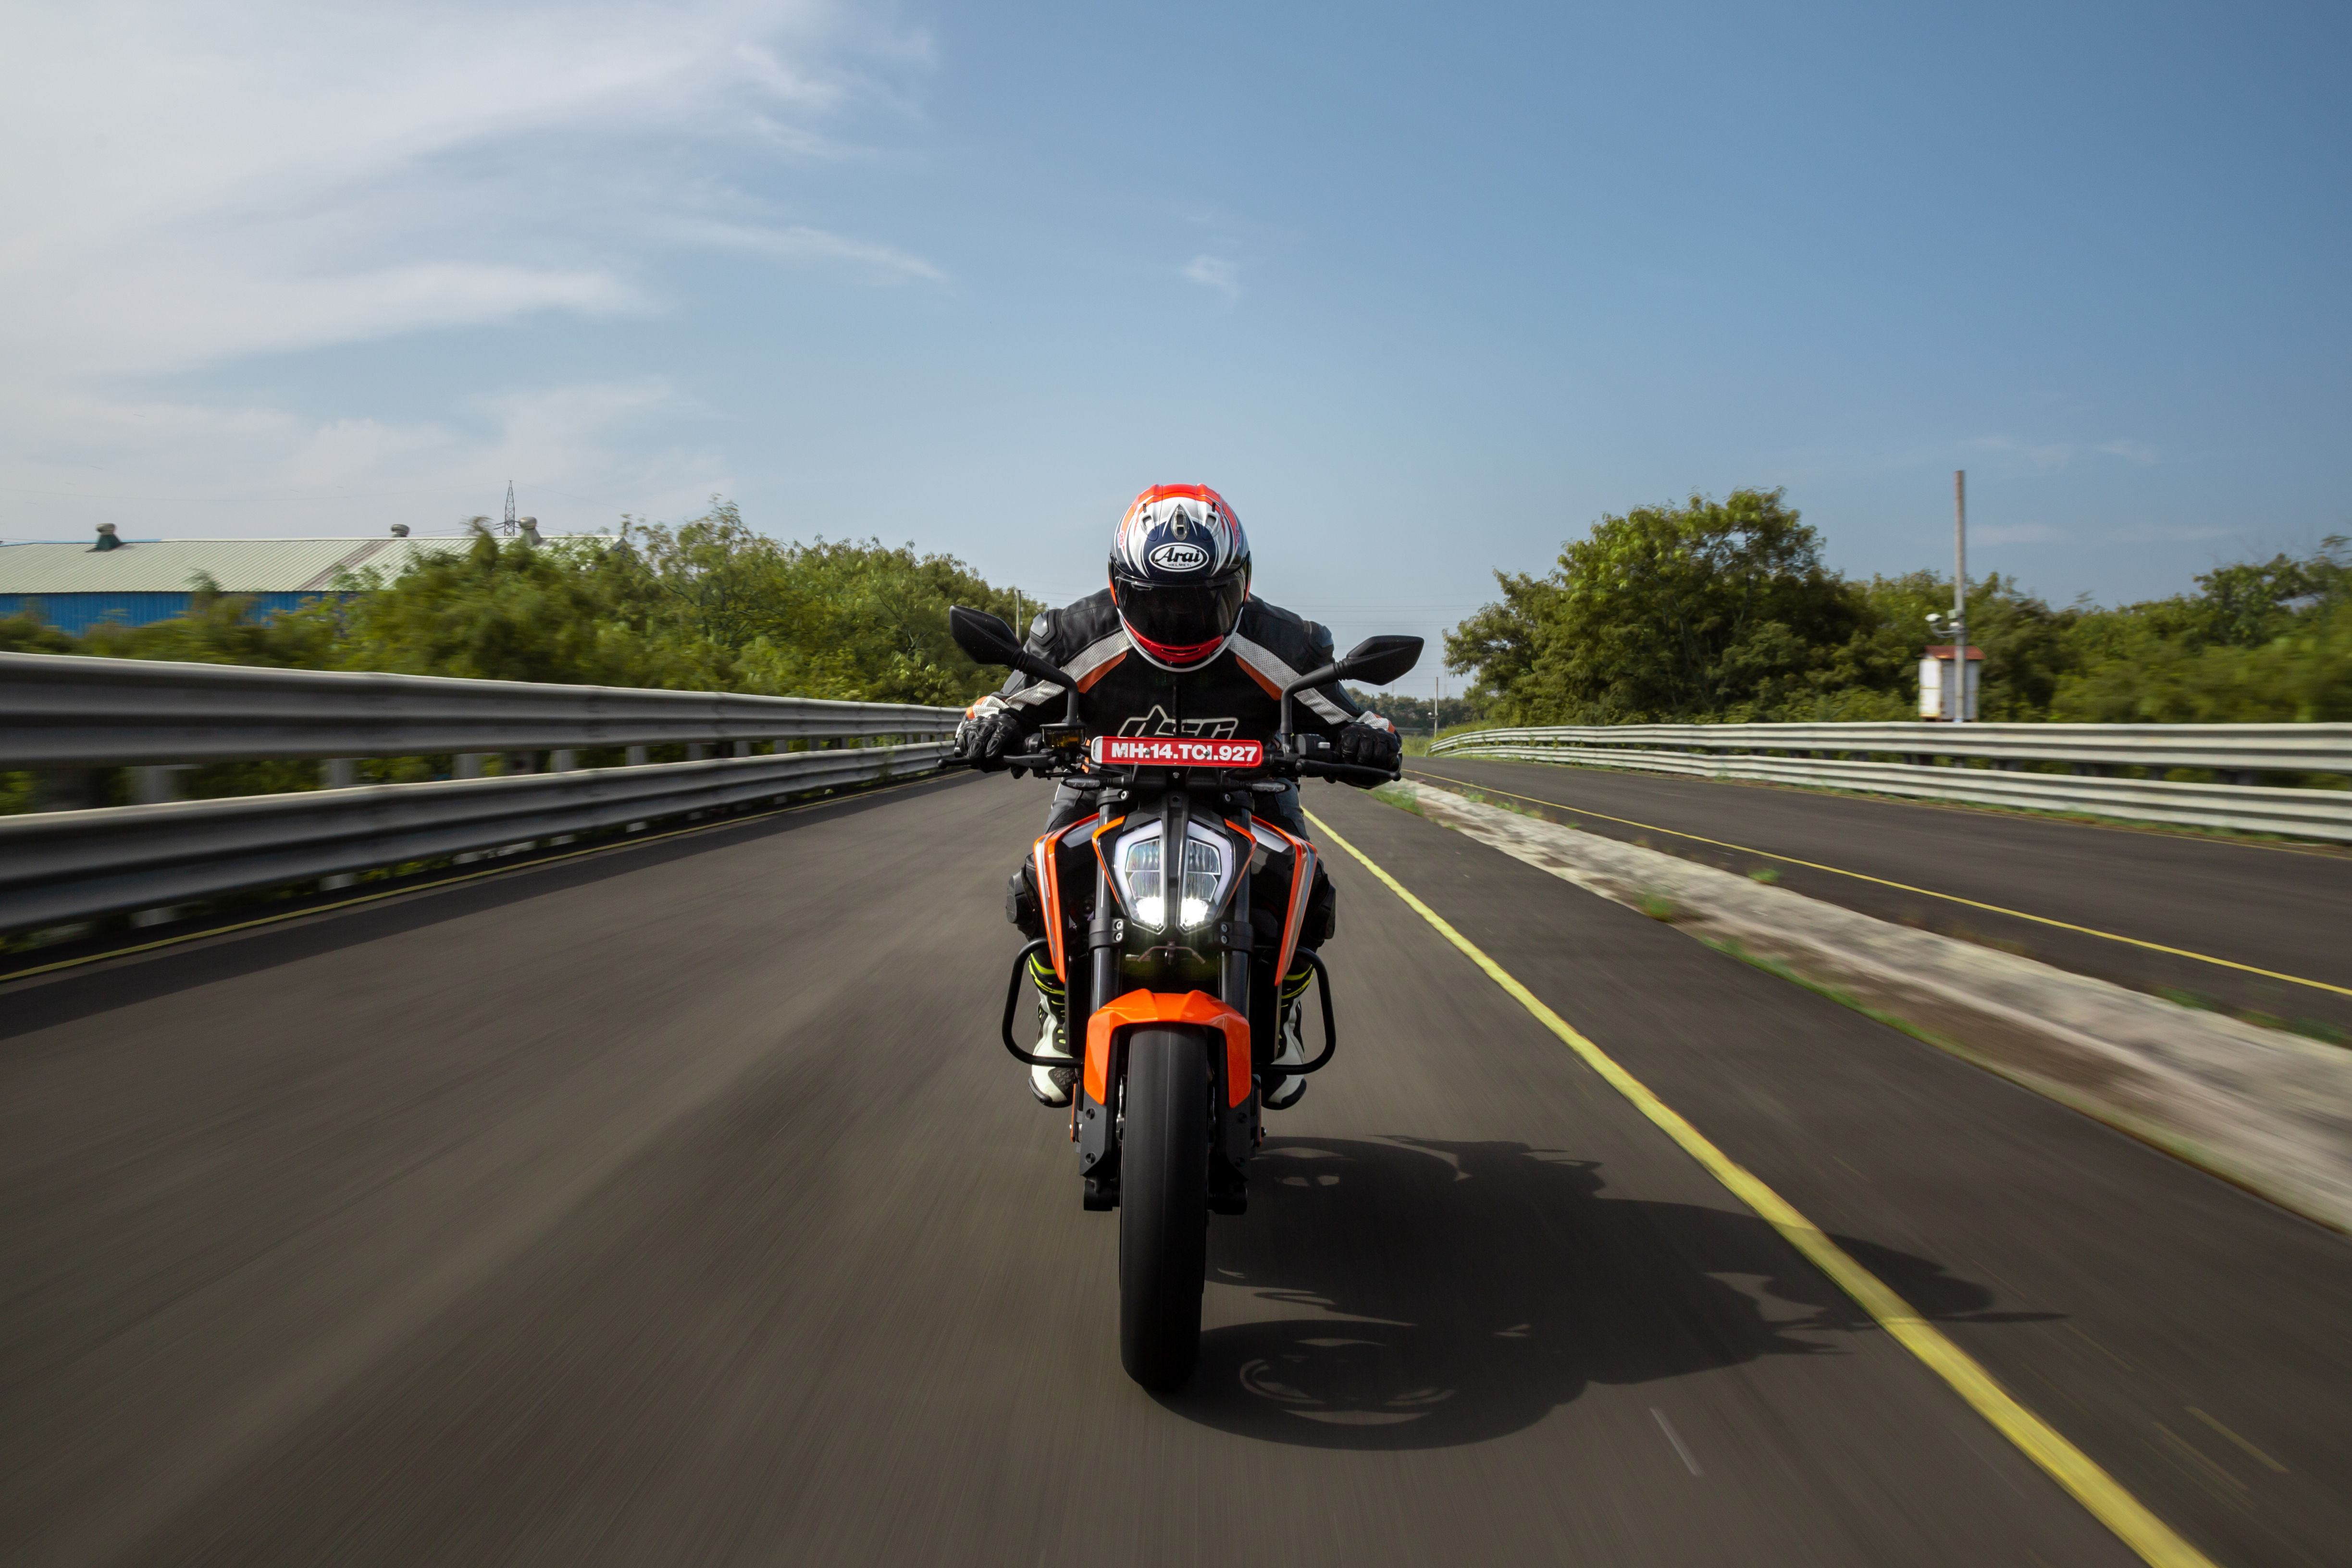 KTM To Develop New 750cc Range Of Motorcycles 